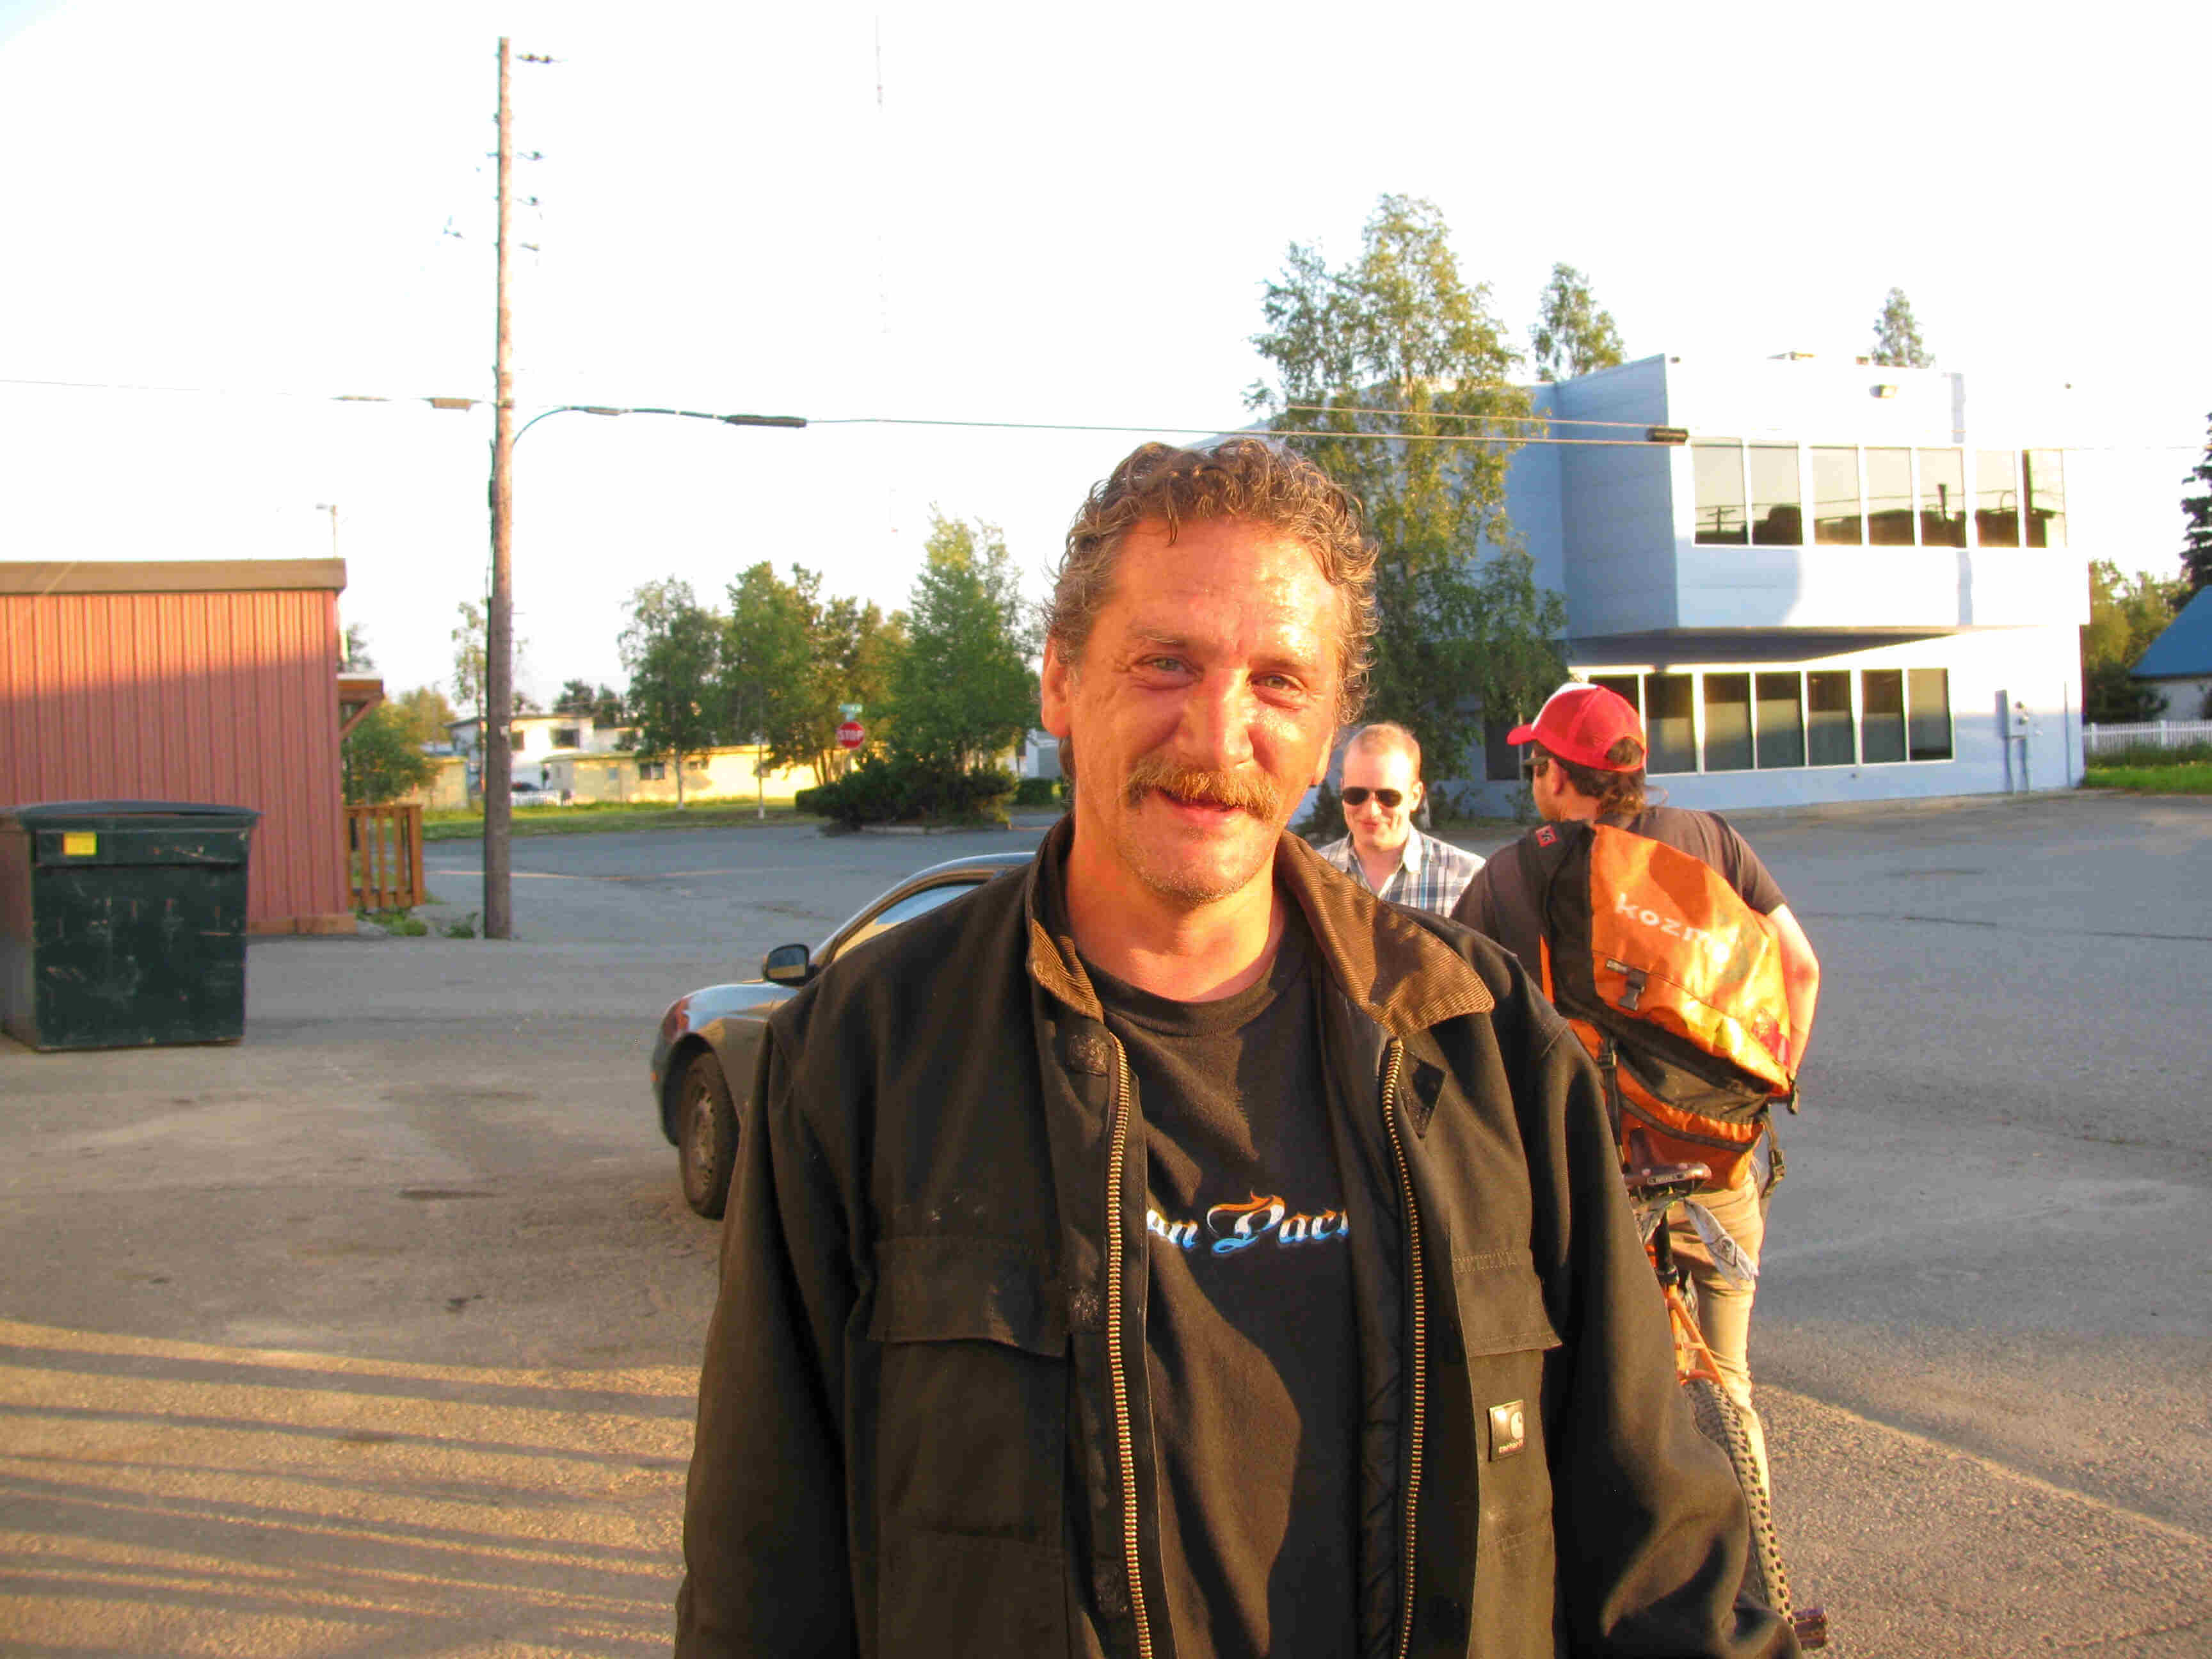 Front view of a person with a mustache and wearing a black jacket, standing and posing, outside on a paved lot